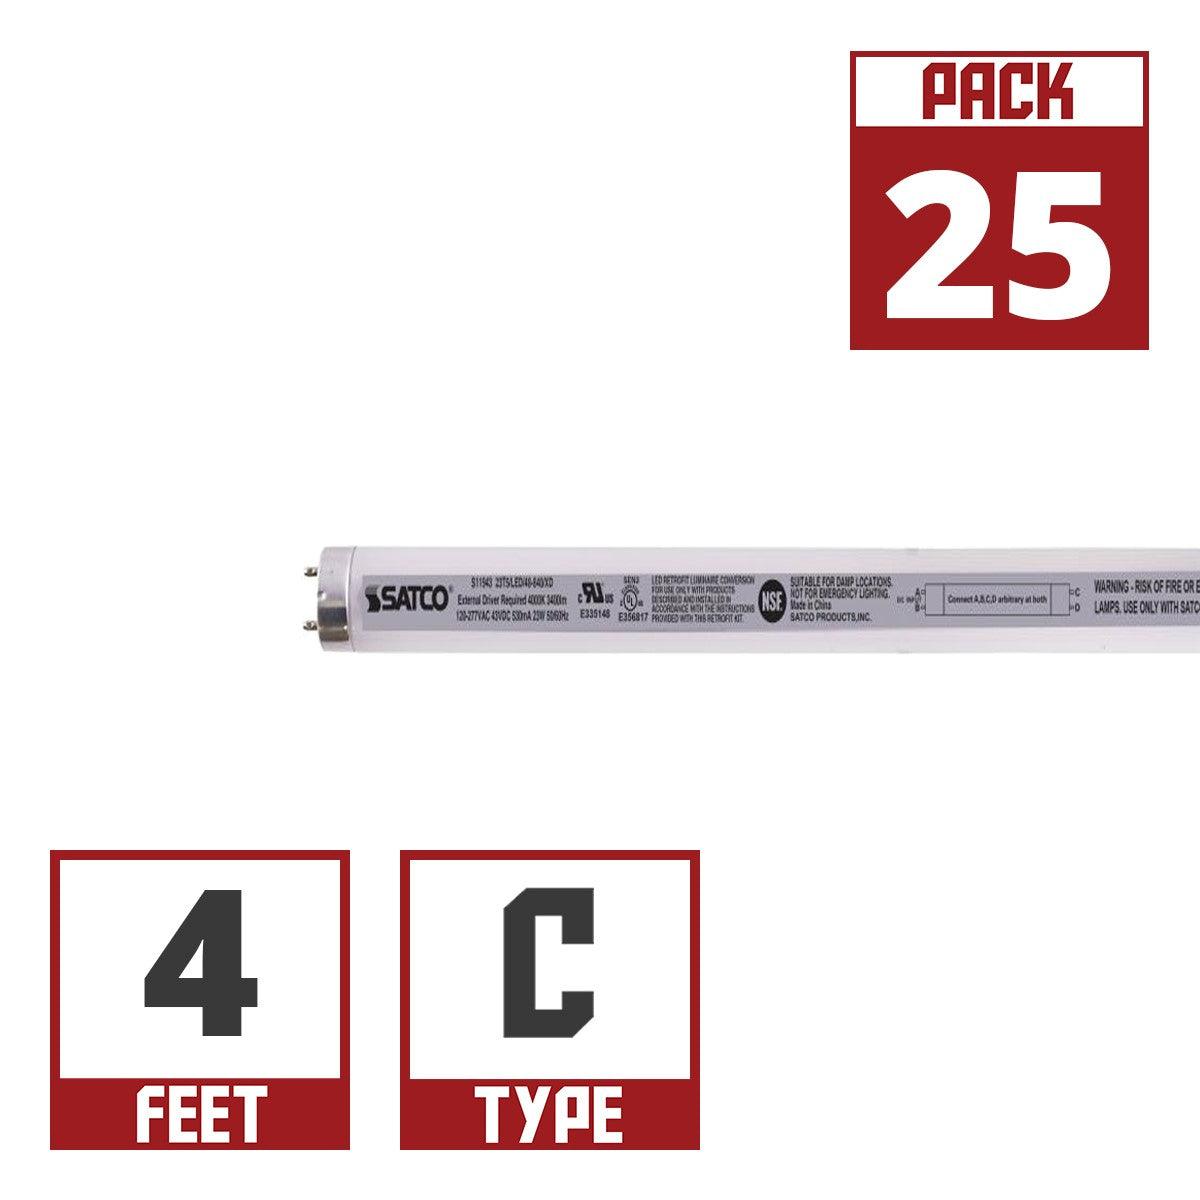 4ft LED T5 Tube, 23 Watt, 3400 Lumens, 4000K, F54T5HO Replacement, Type C External Driver Required (Case Of 25)